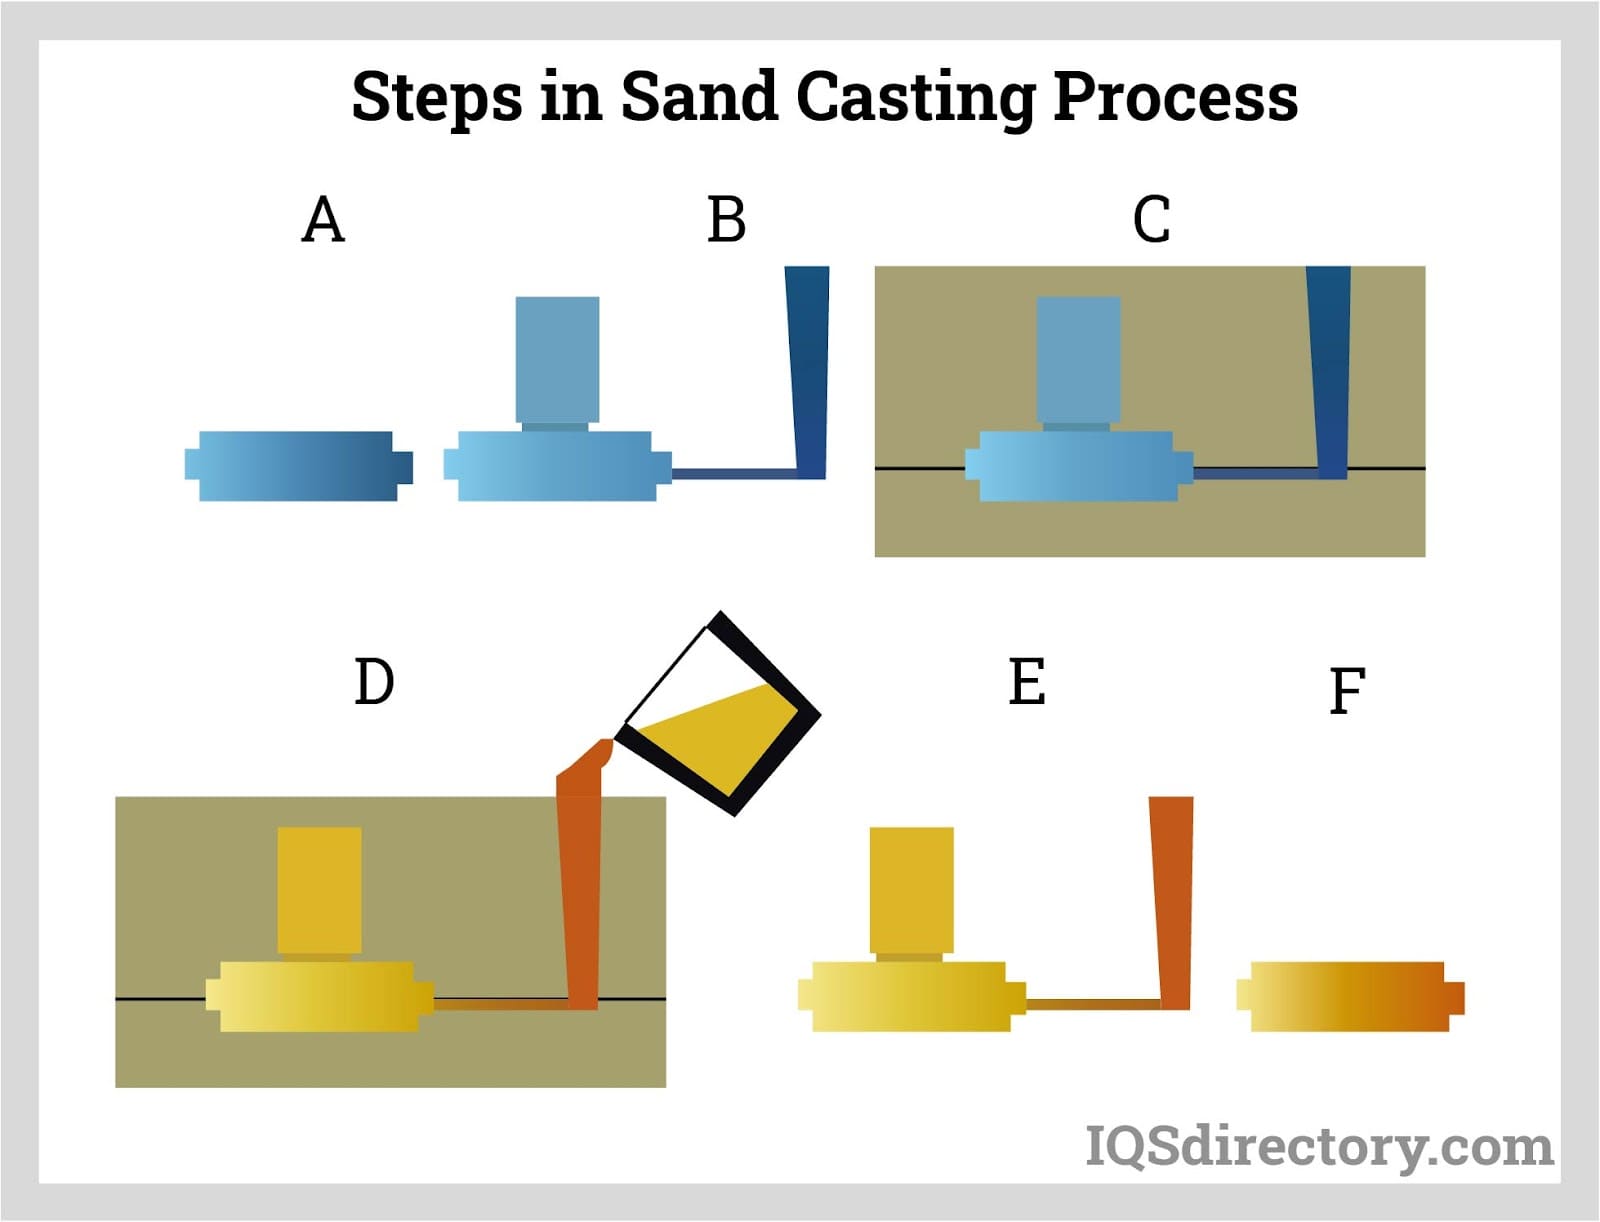 The 3 Types of Sand Used for Sand Casting